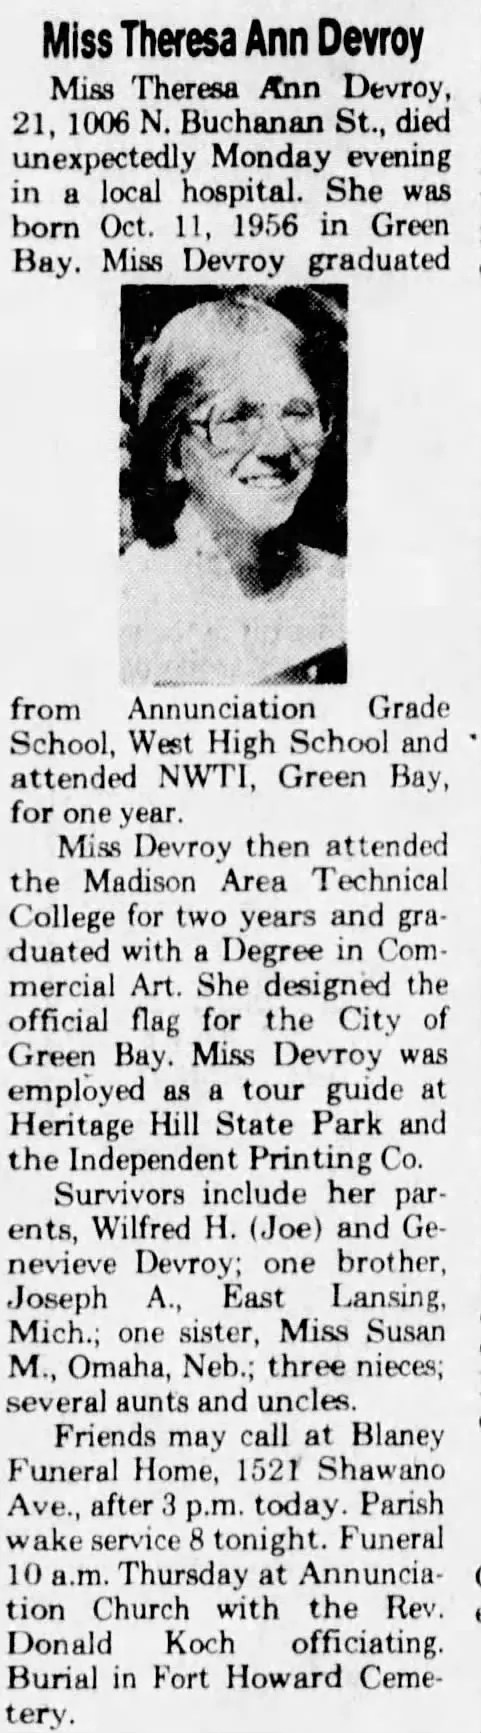 Theresa A. Devroy, who died at age 21, designed a Green Bay flag when she was a 16-year-old junior at West High School and won a citywide contest.